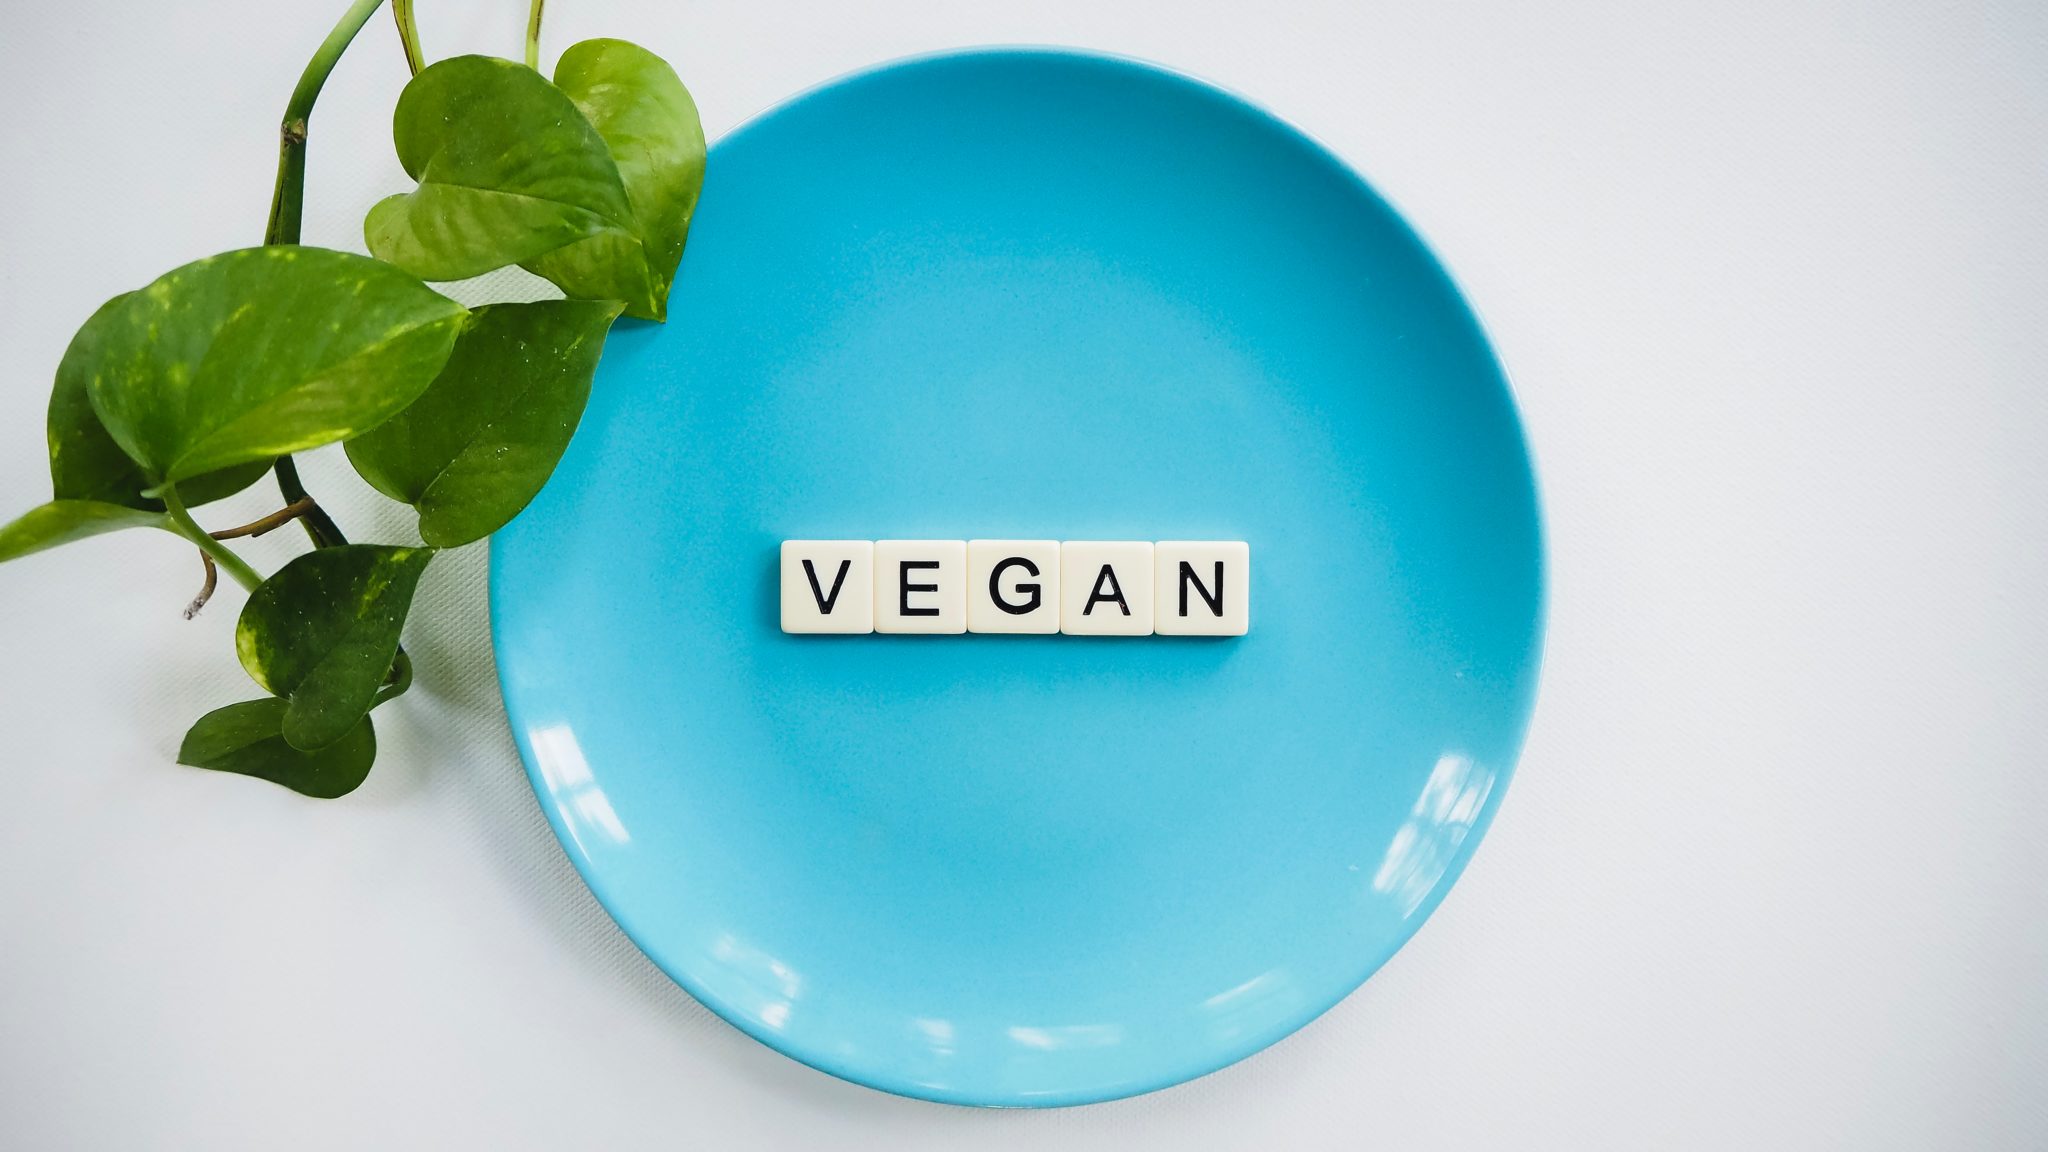 birds eye shot of a blue plate with the word vegan spelled across the plate with white tiles